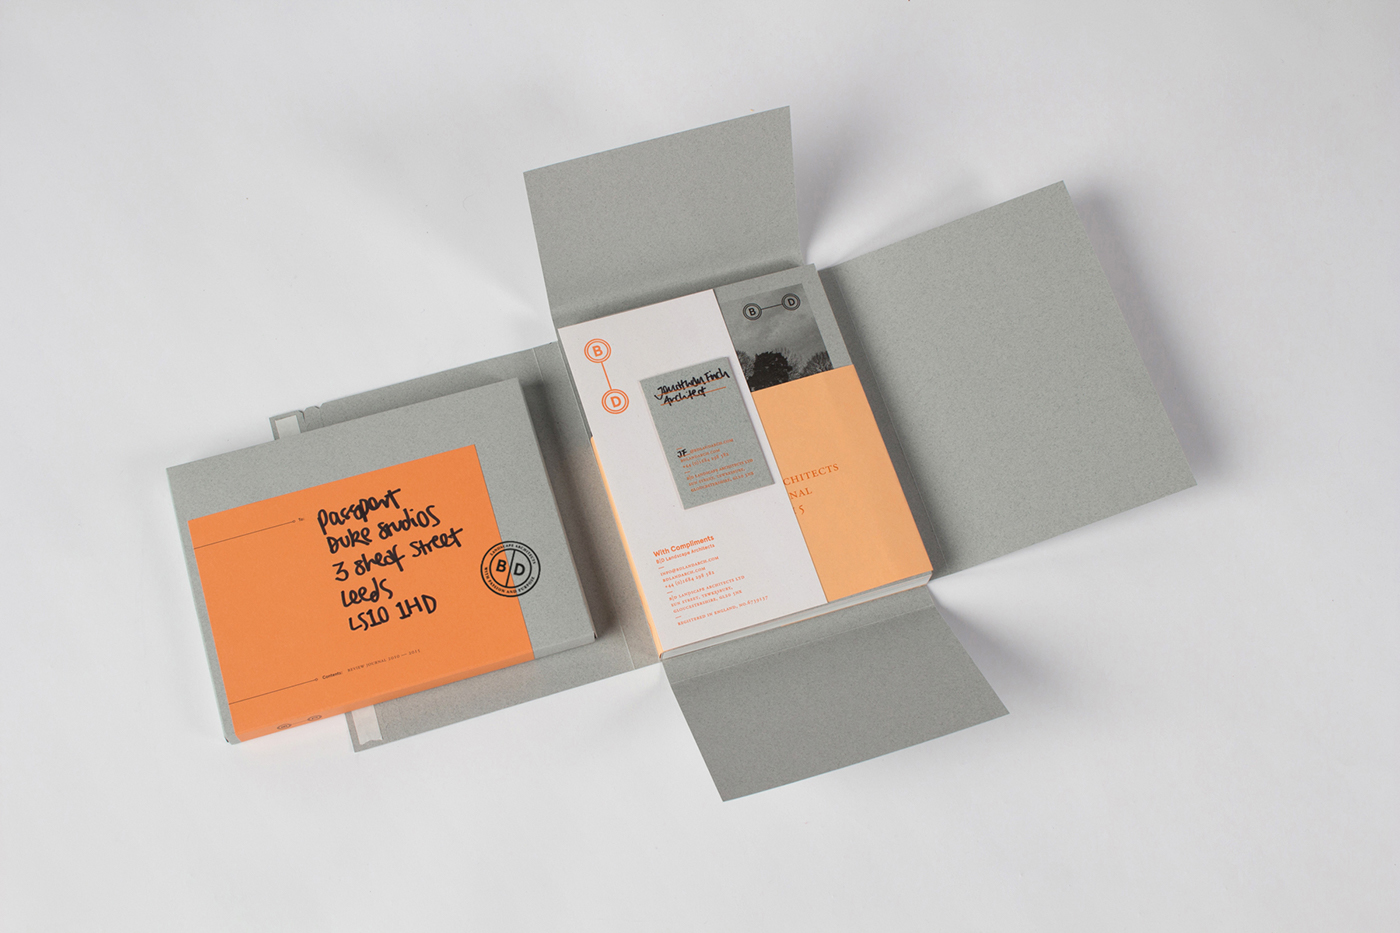 Landscape Architects Book Packaging Design